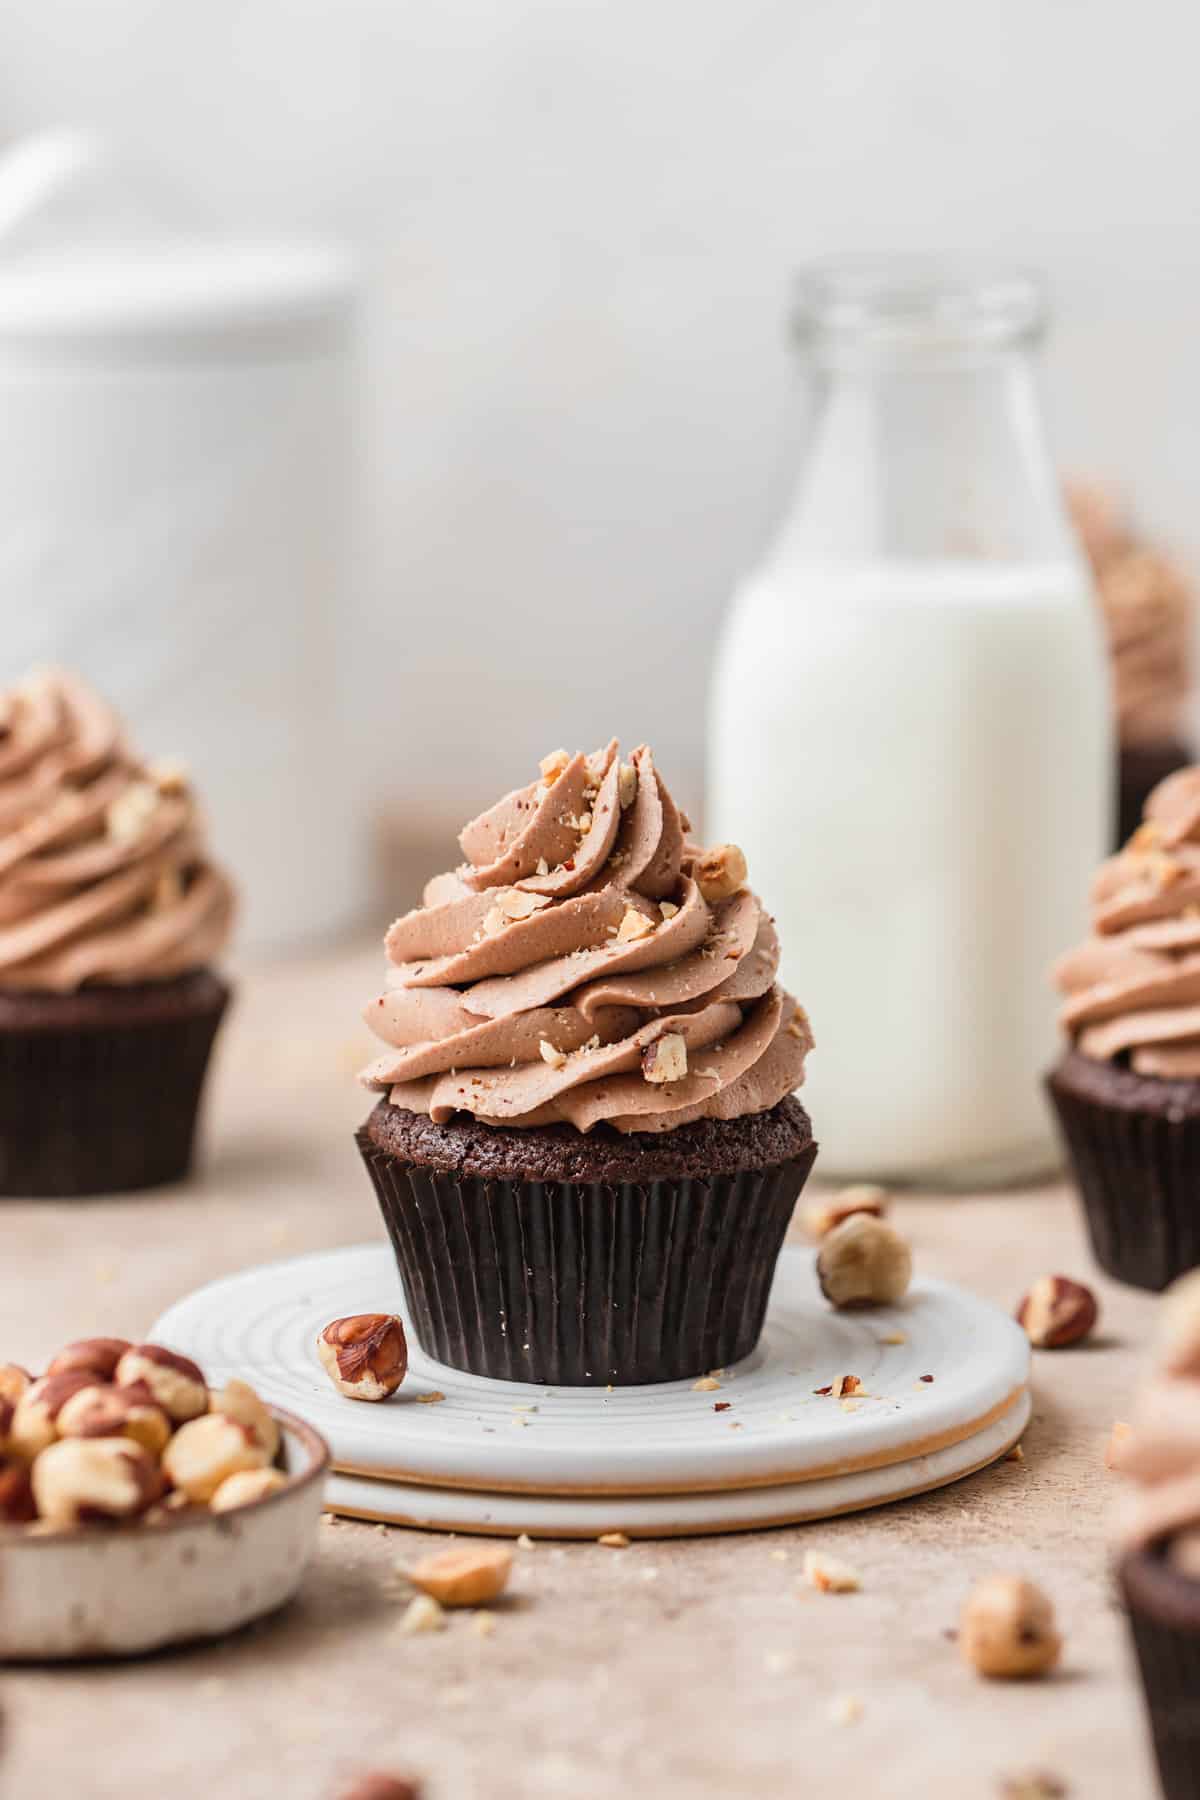 chocolate nutella cupcakes with nutella frosting.